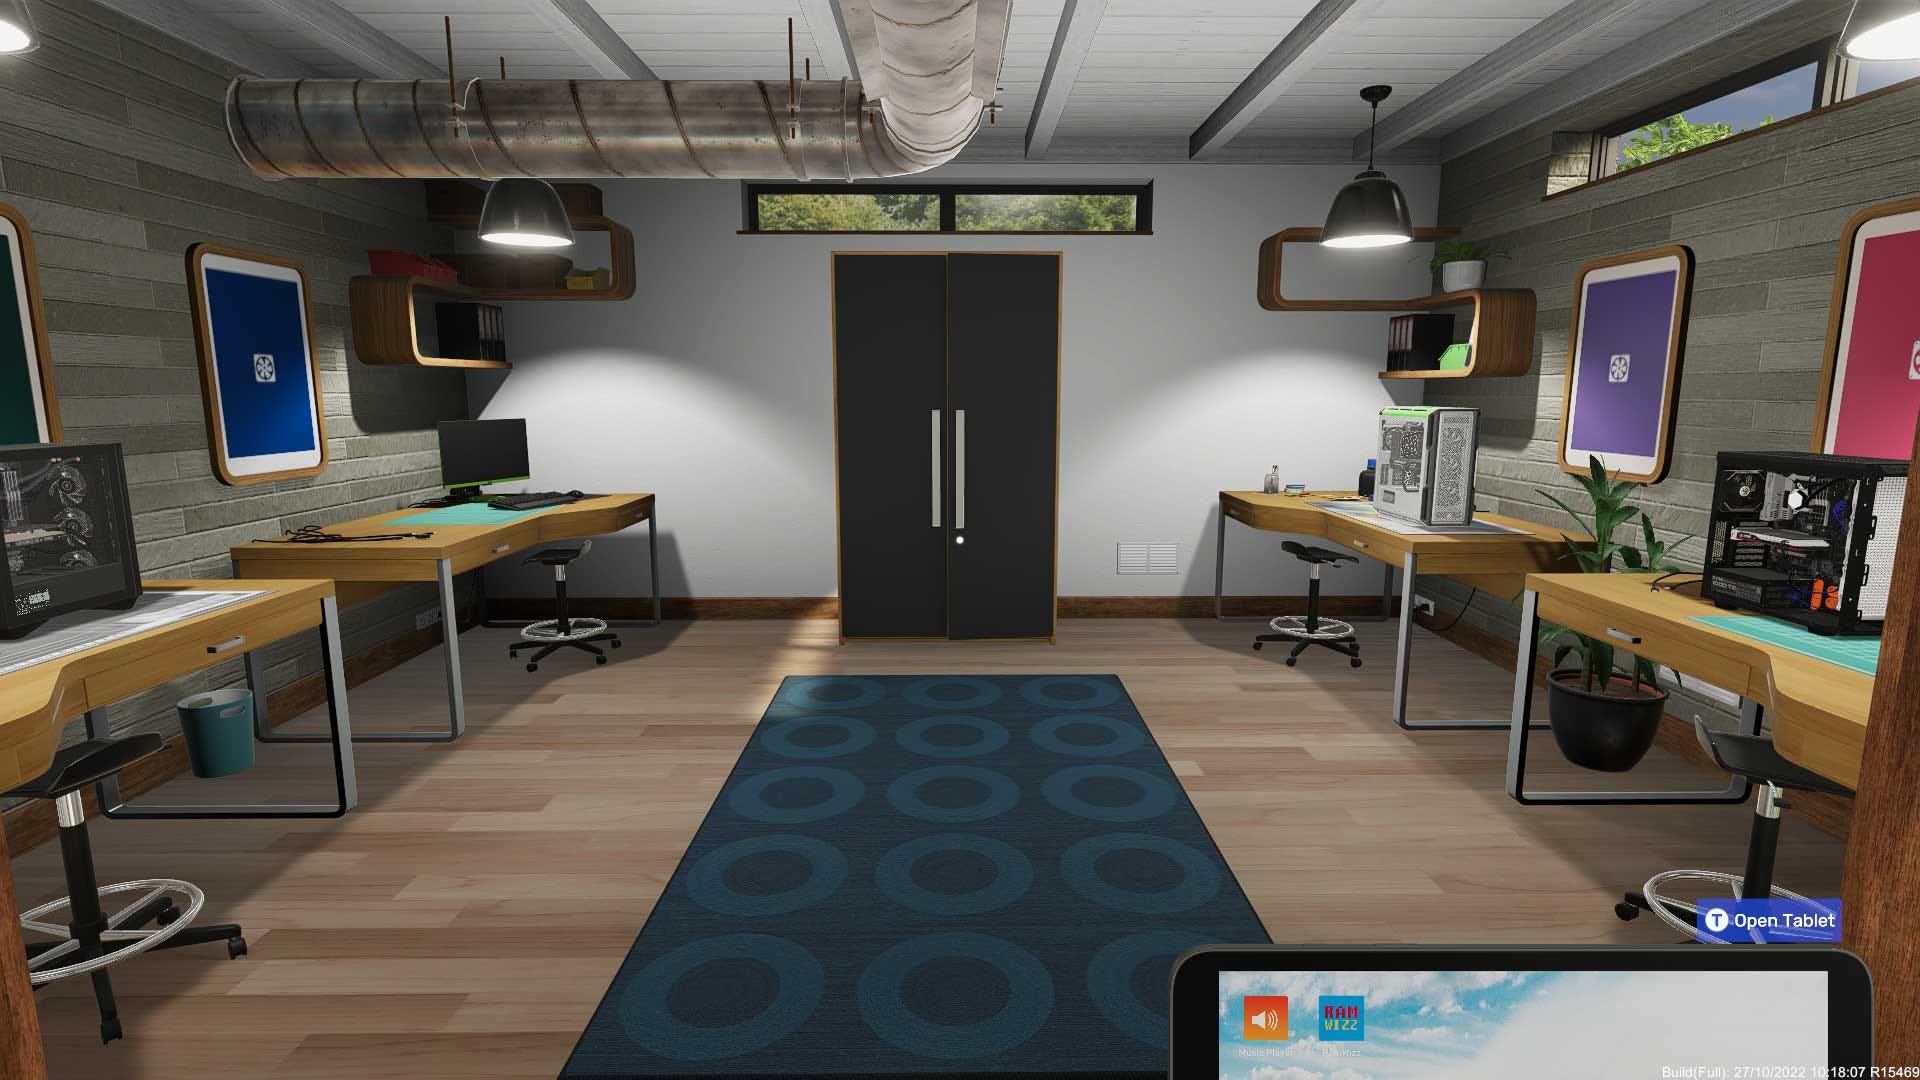 Office space with blue rug, cabinet, and four desks with different components on them.